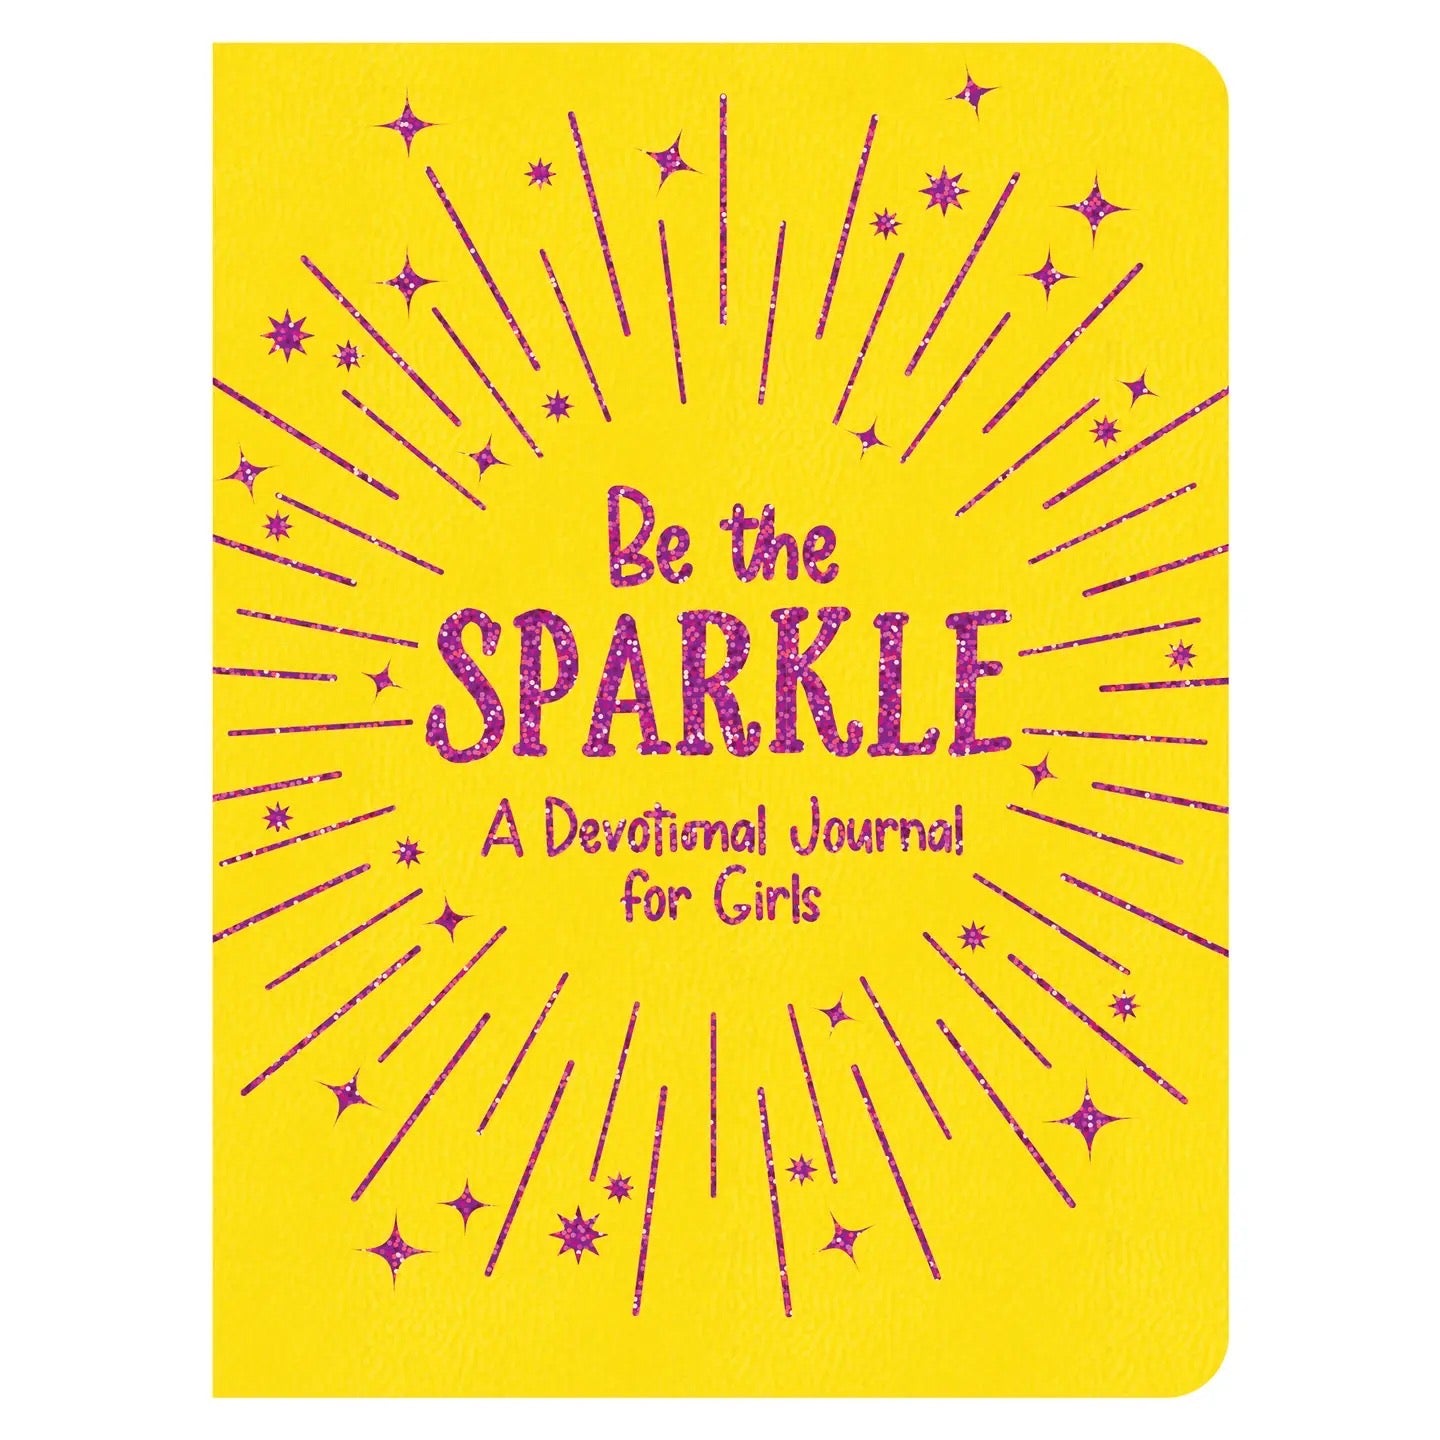 Be the Sparkle : A Devotional Journal For Girls